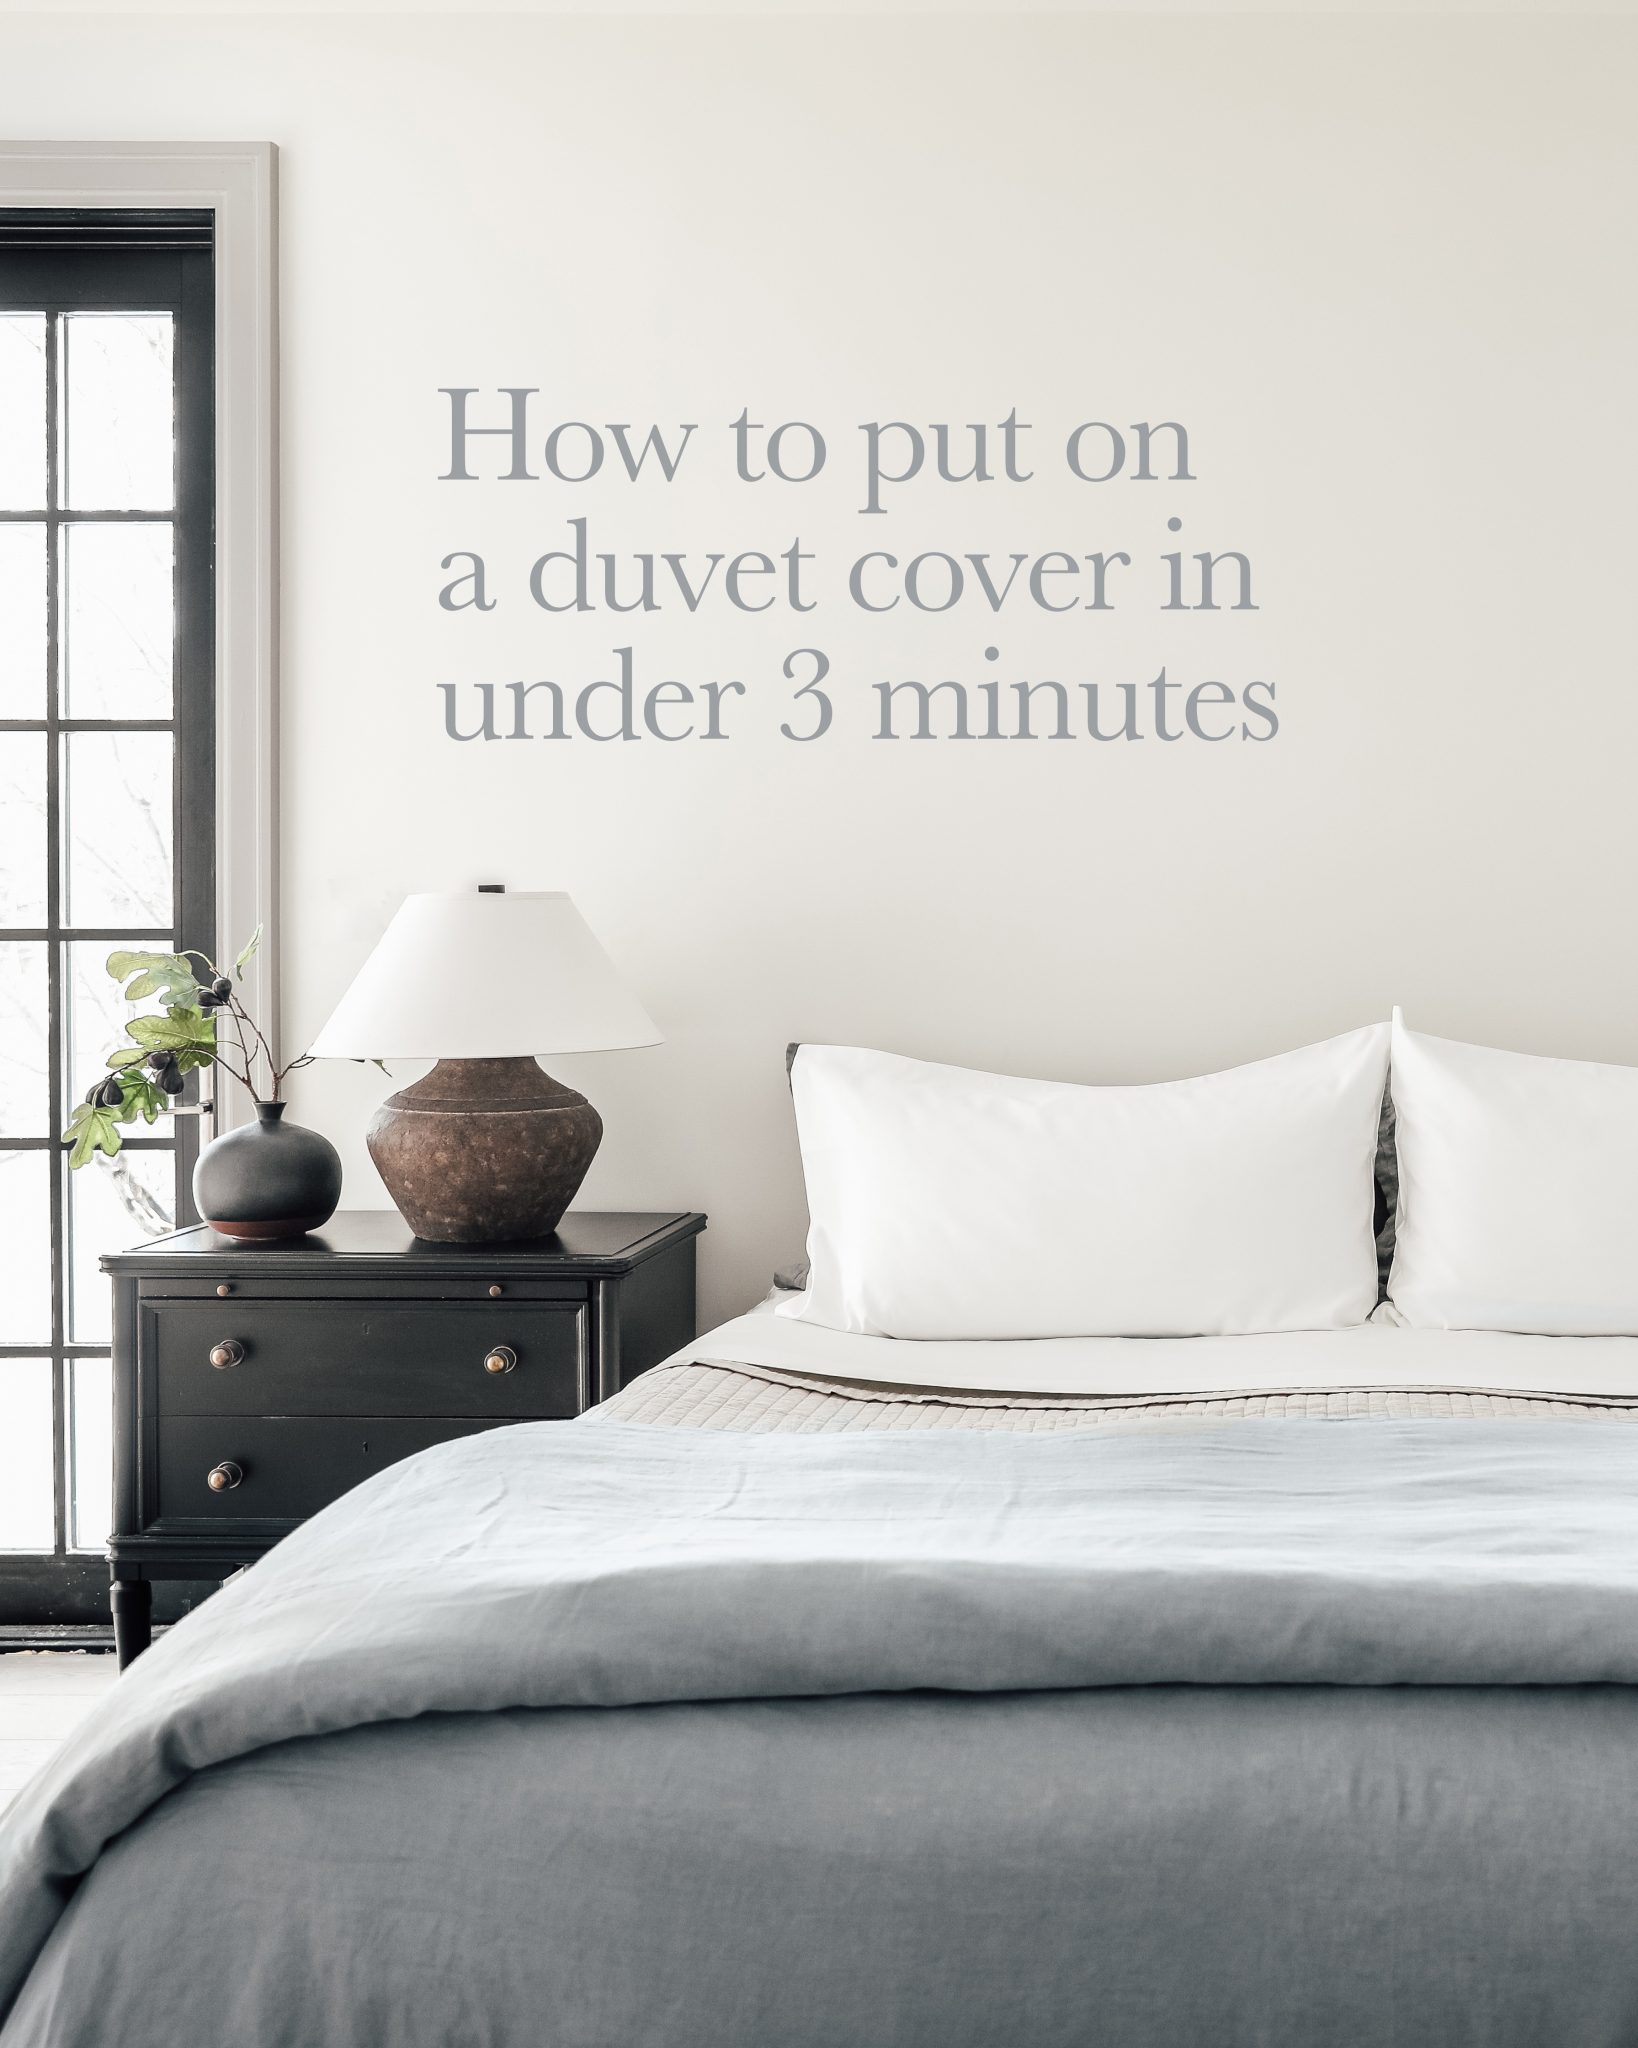 How To Put On A Duvet Cover In Under 3, How To Install Duvet Cover Clips